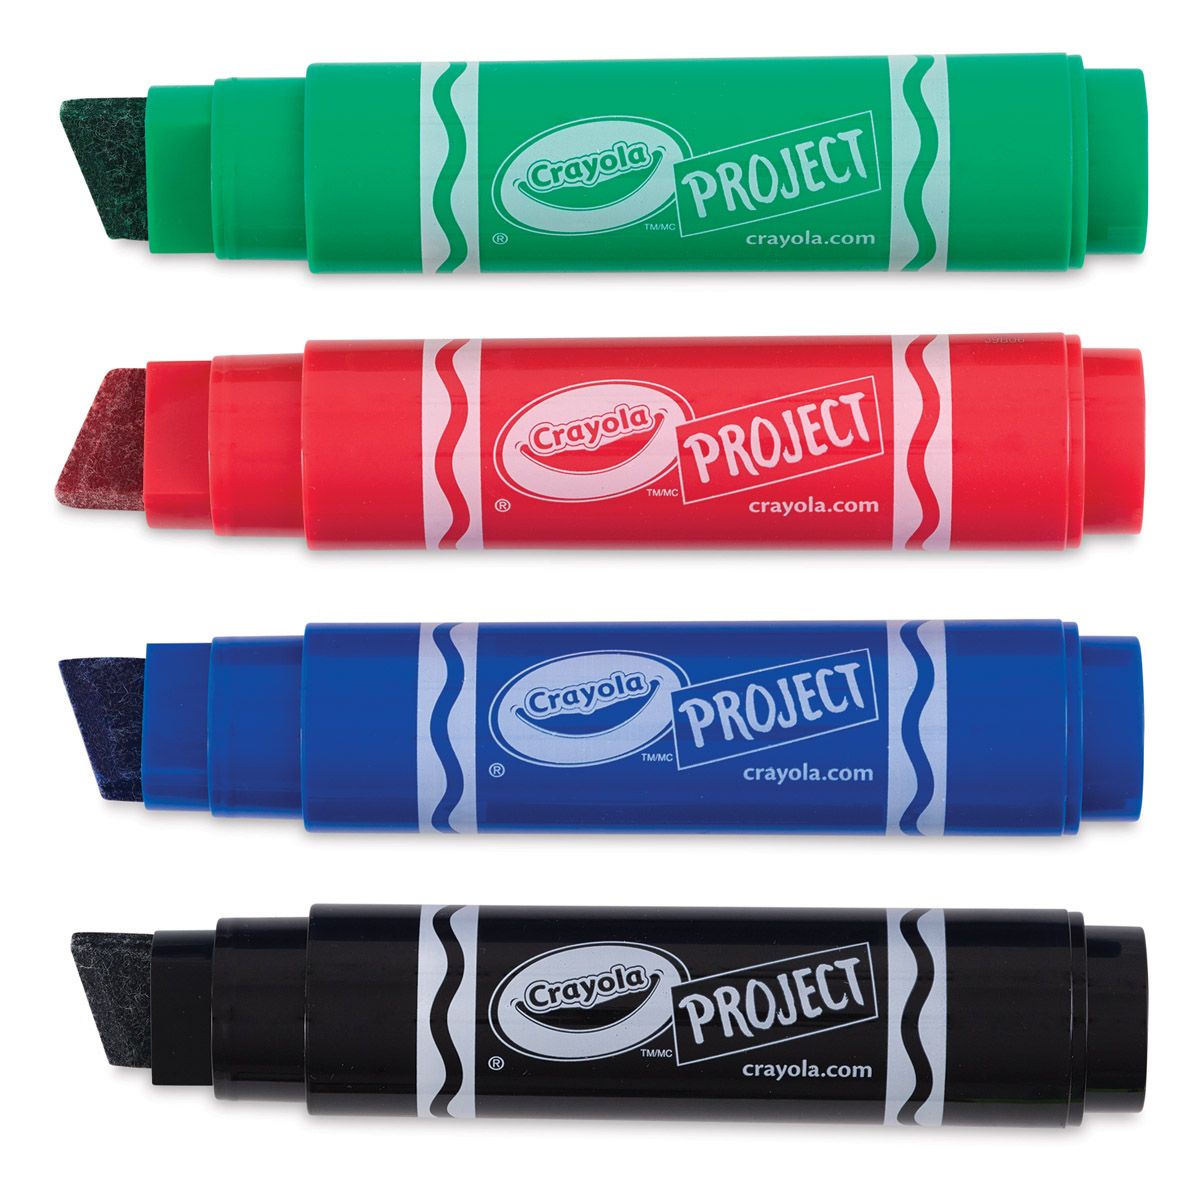 Crayola Project Erasable Poster Markers (588371)